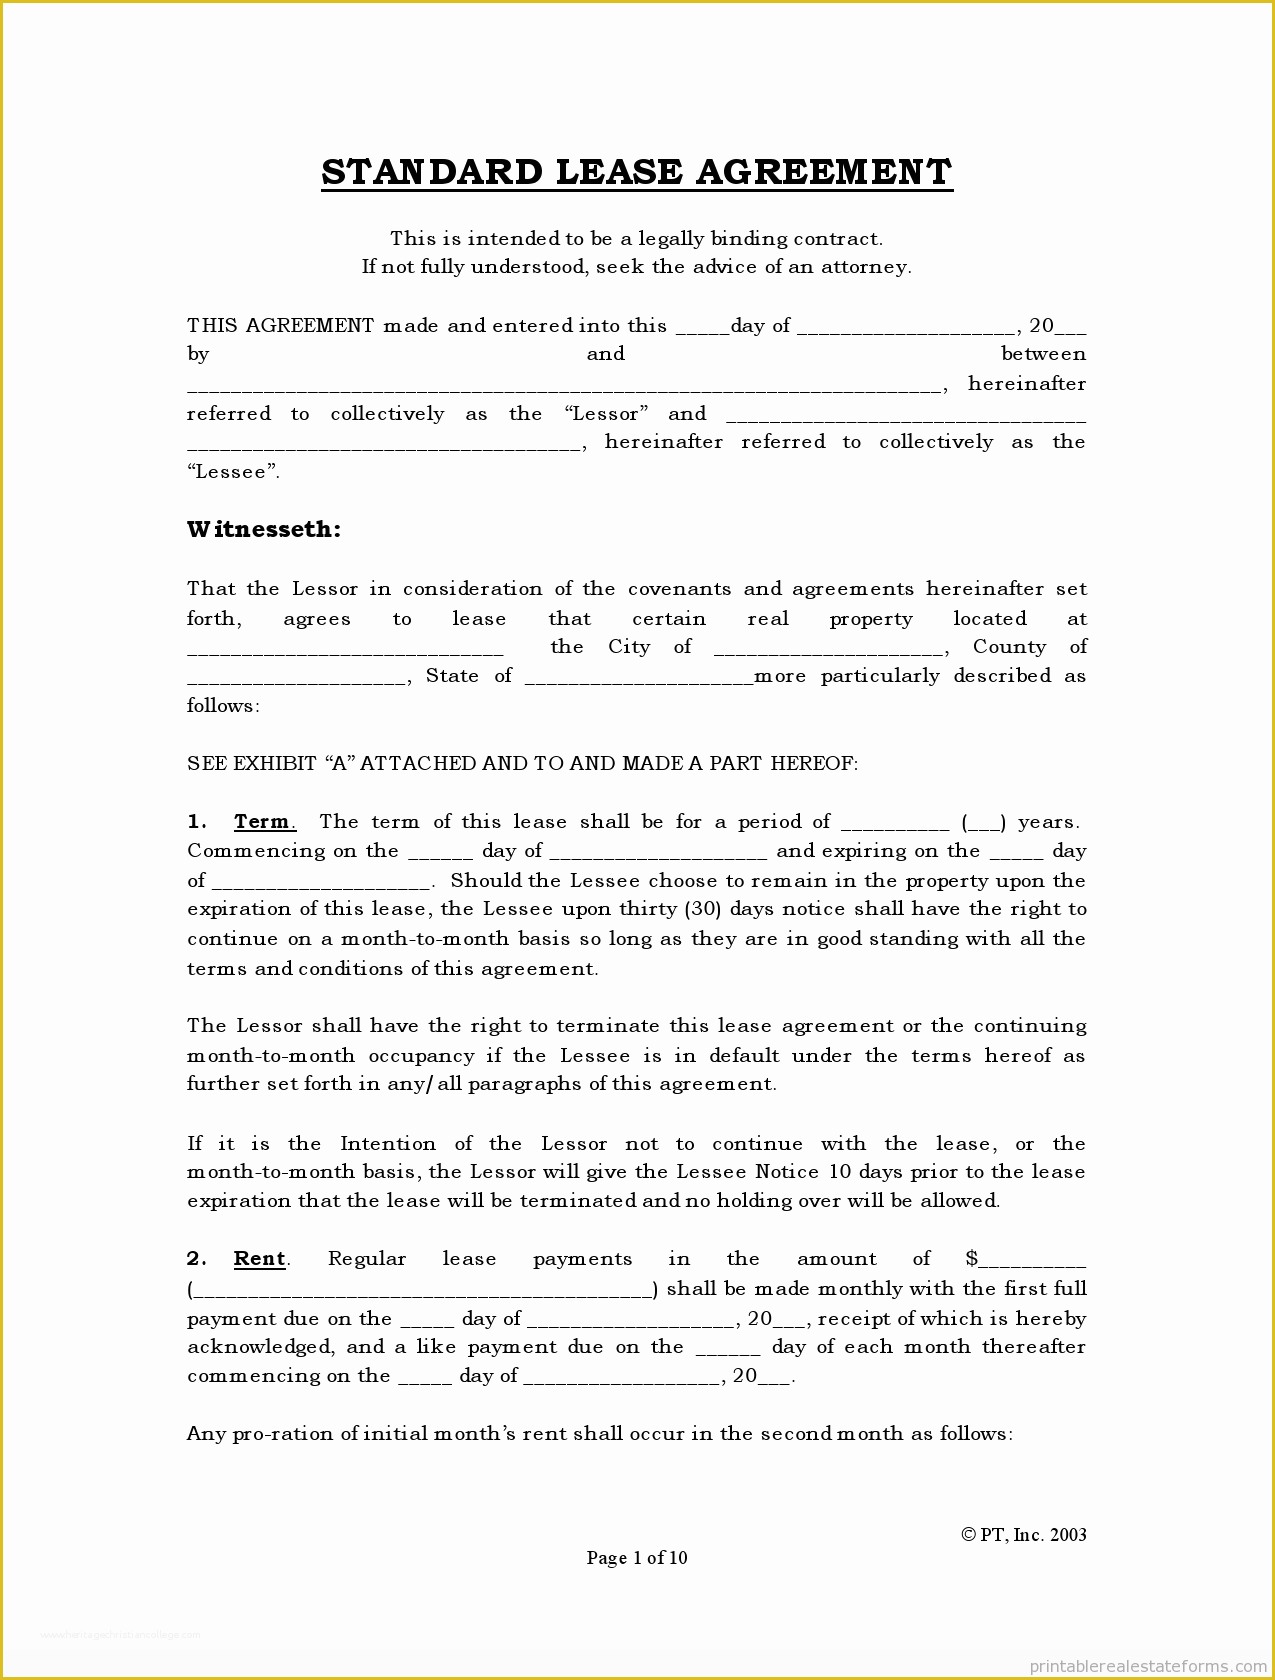 Free Blank Lease Agreement Template Of Free Rental Agreements to Print